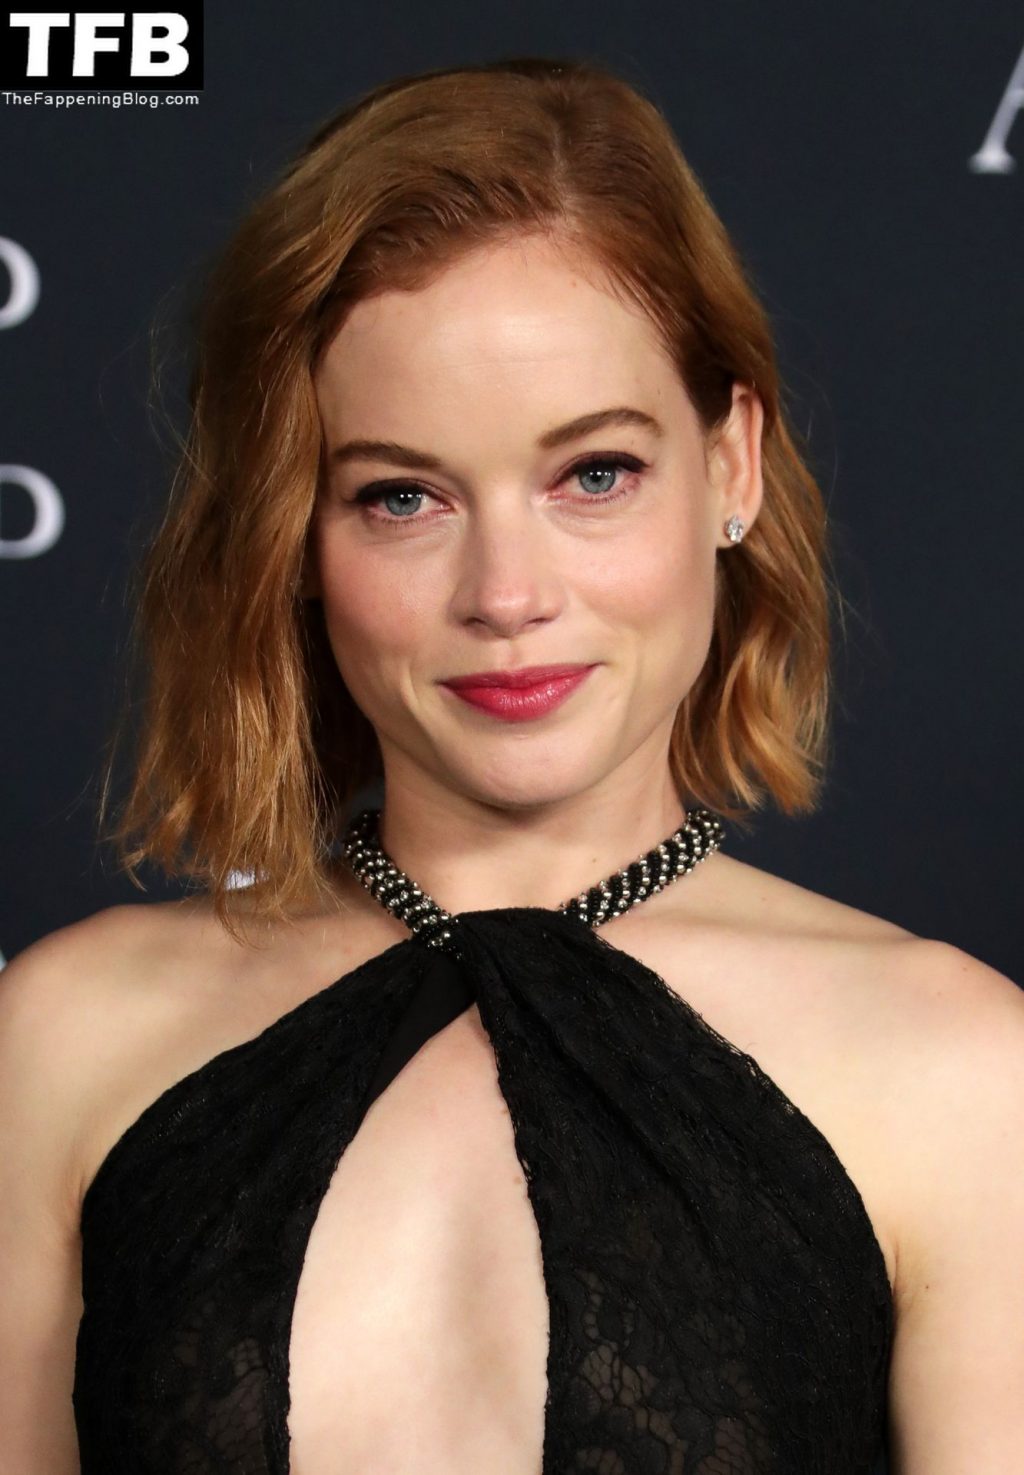 Jane Levy Poses in a See-Through Dress at the 2021 InStyle Awards At The Getty Center (11 Photos)